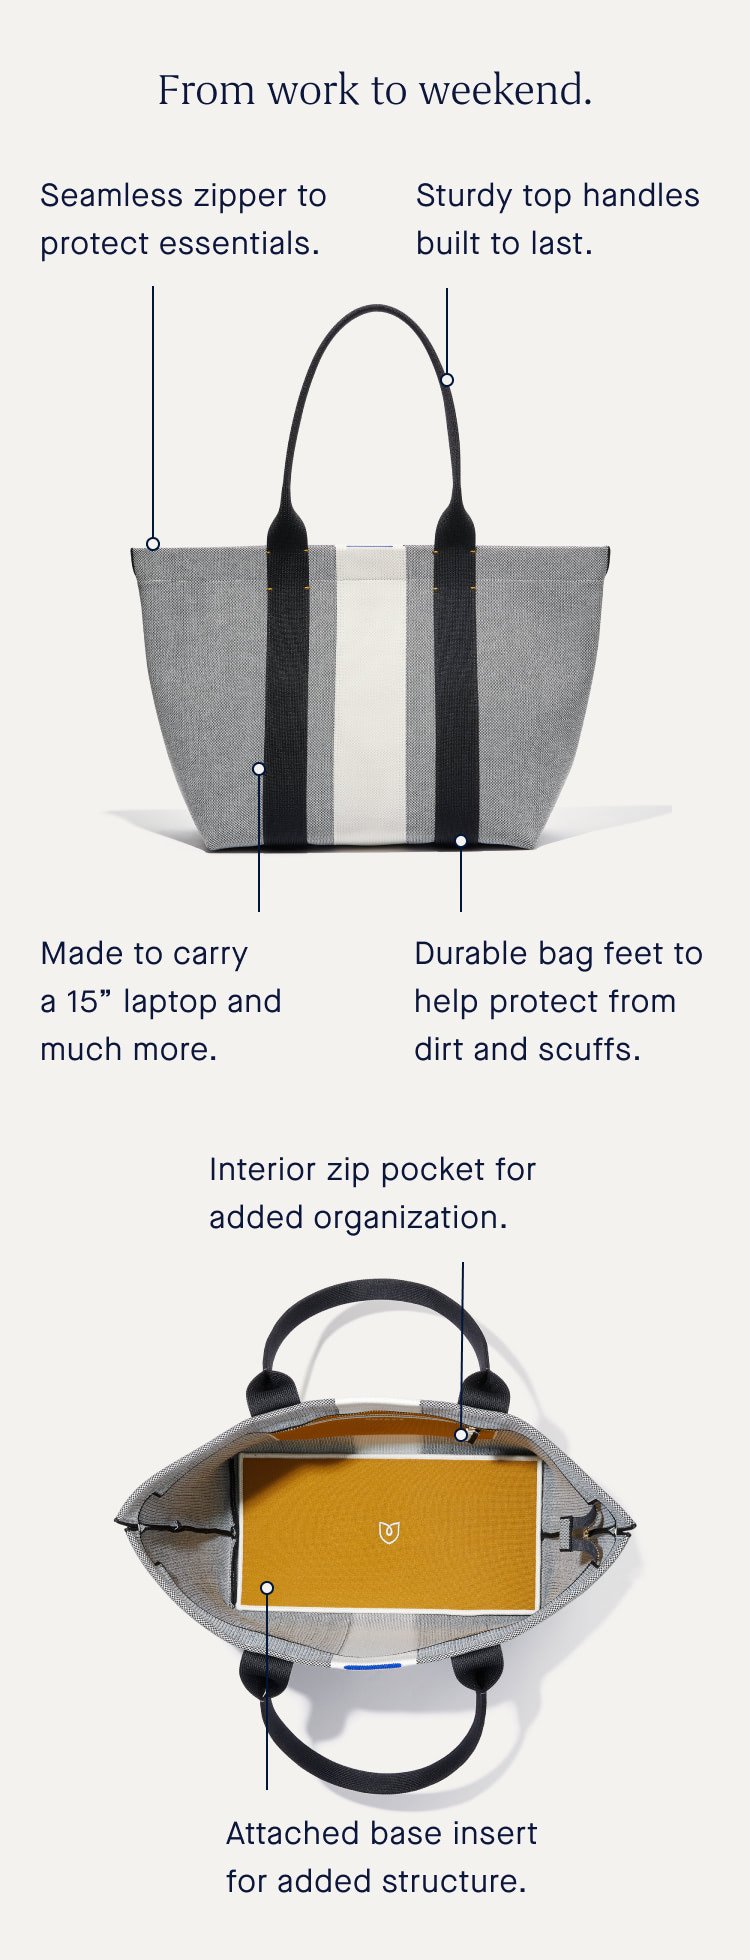 How to Replace Basic Bag Lining - iFixit Repair Guide